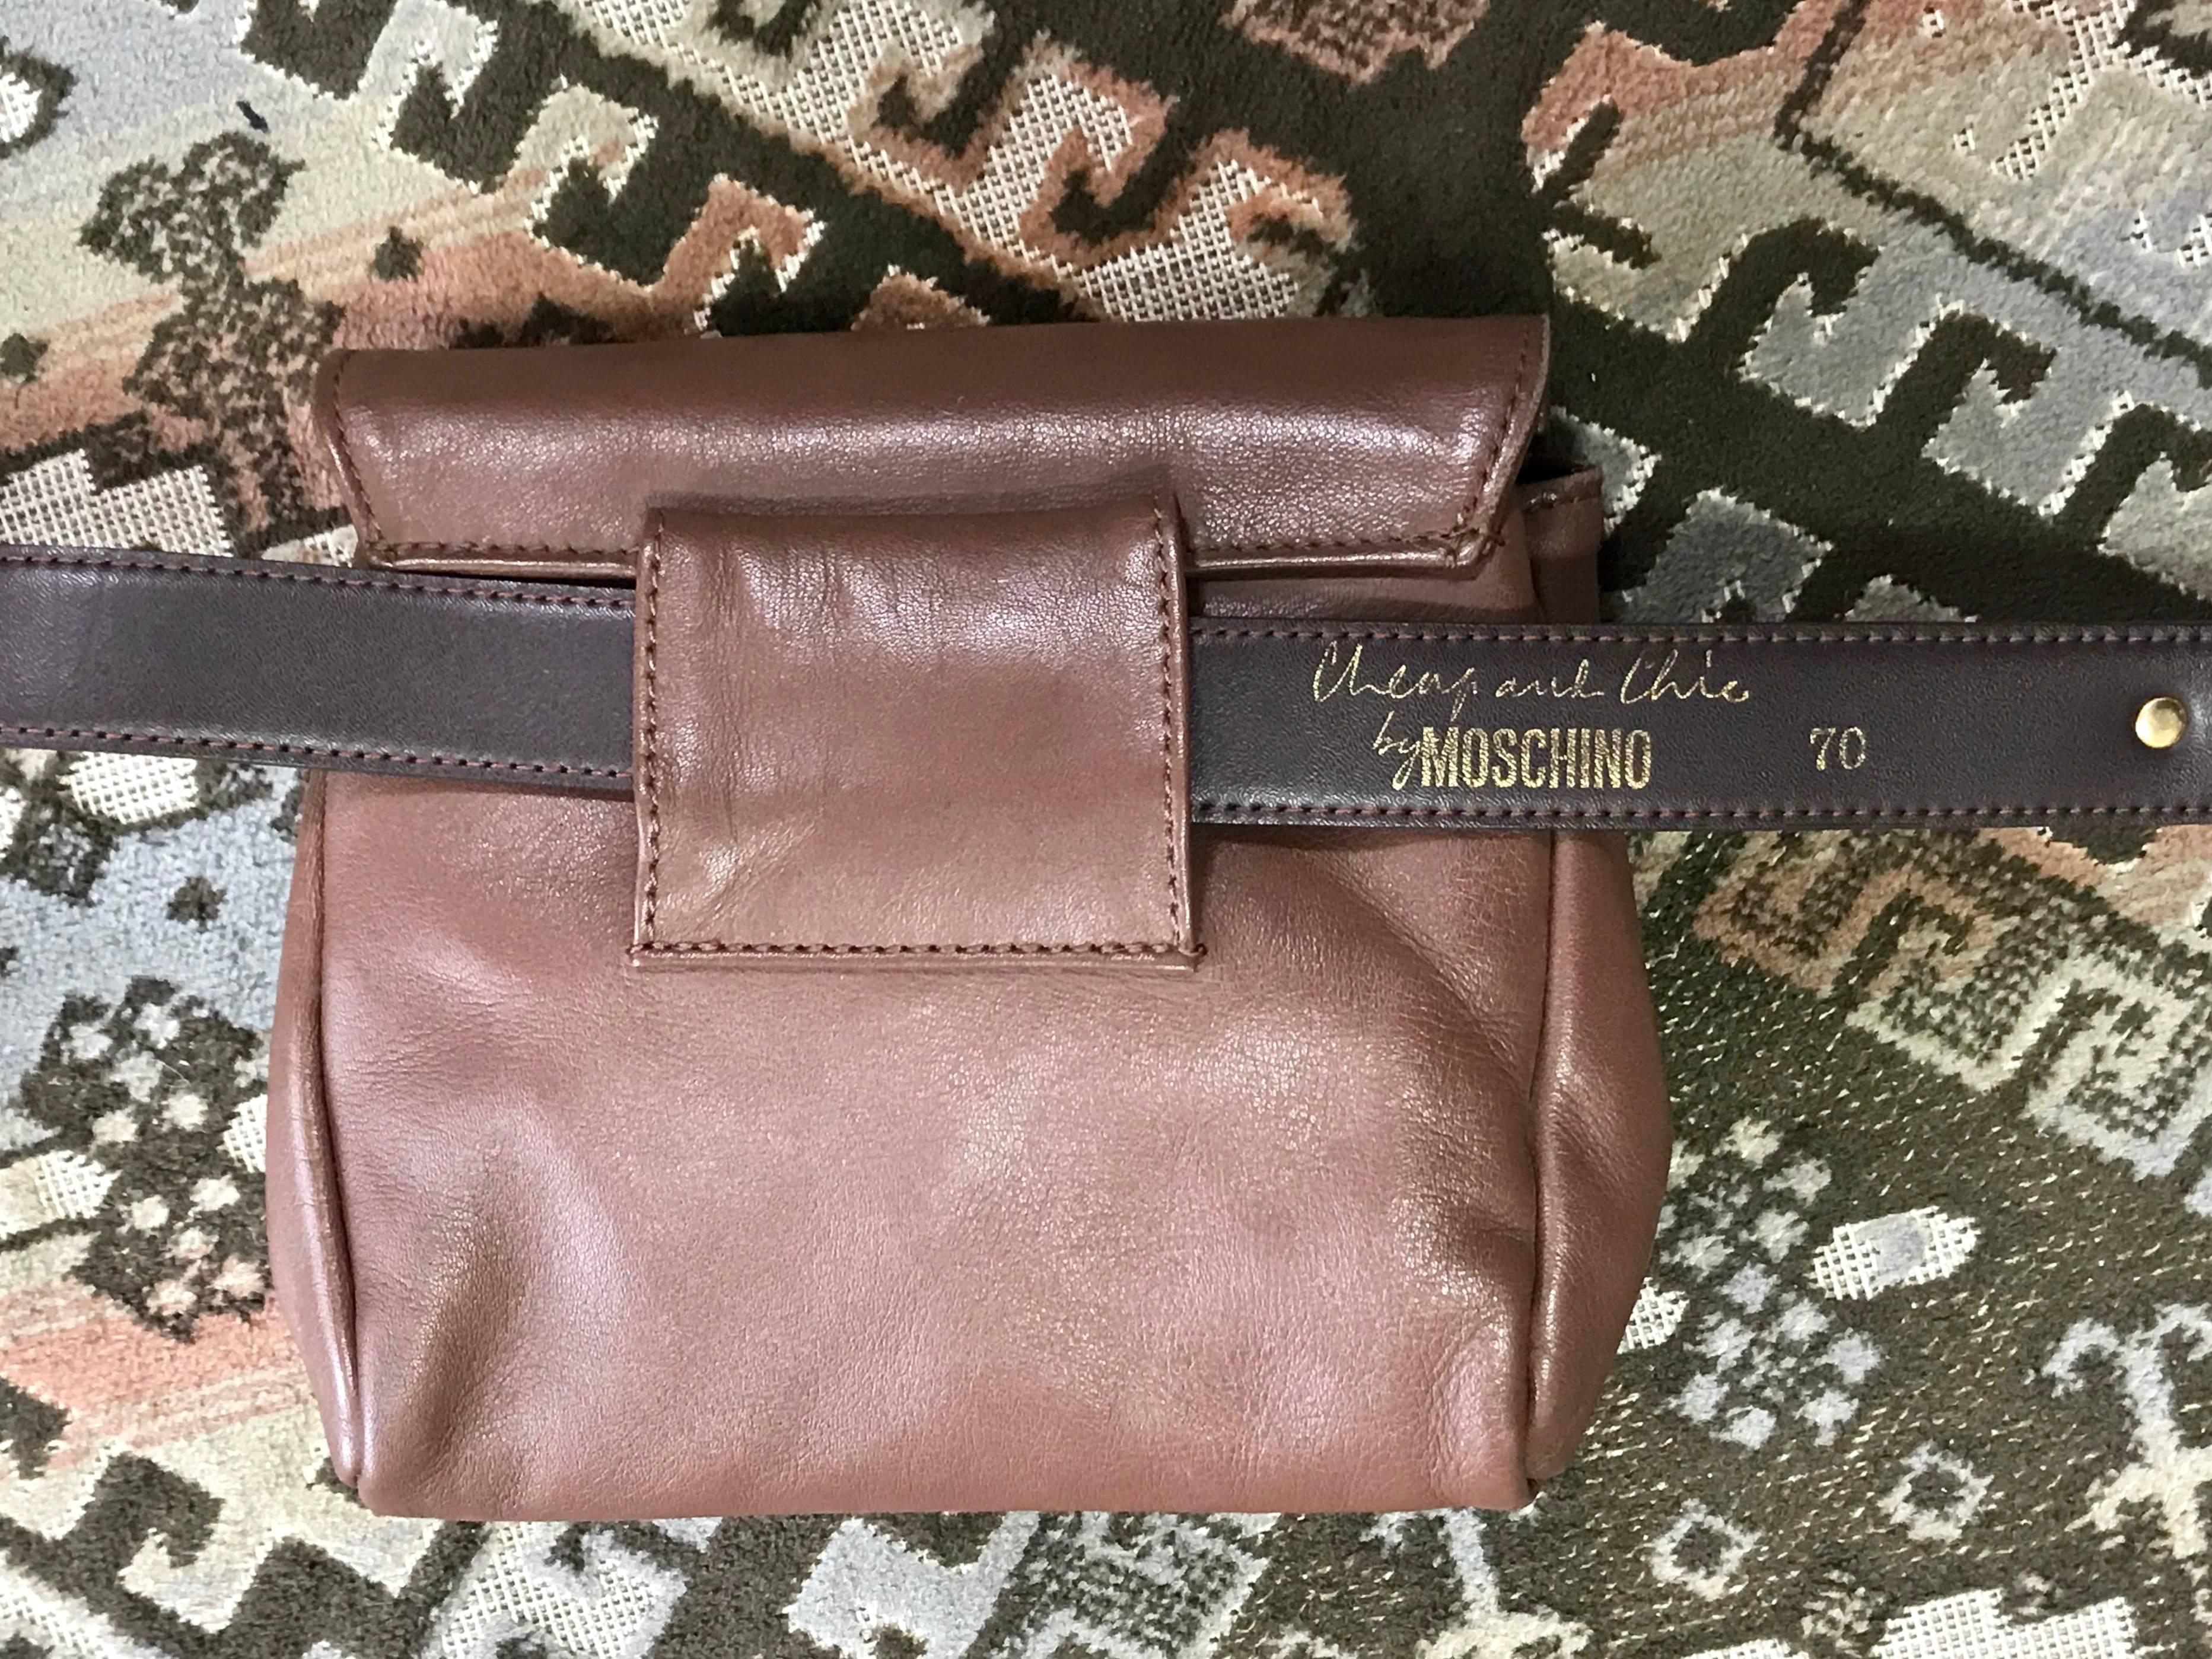 Black Vintage MOSCHINO brown fanny pack, clutch bag with button motifs and belt. For Sale